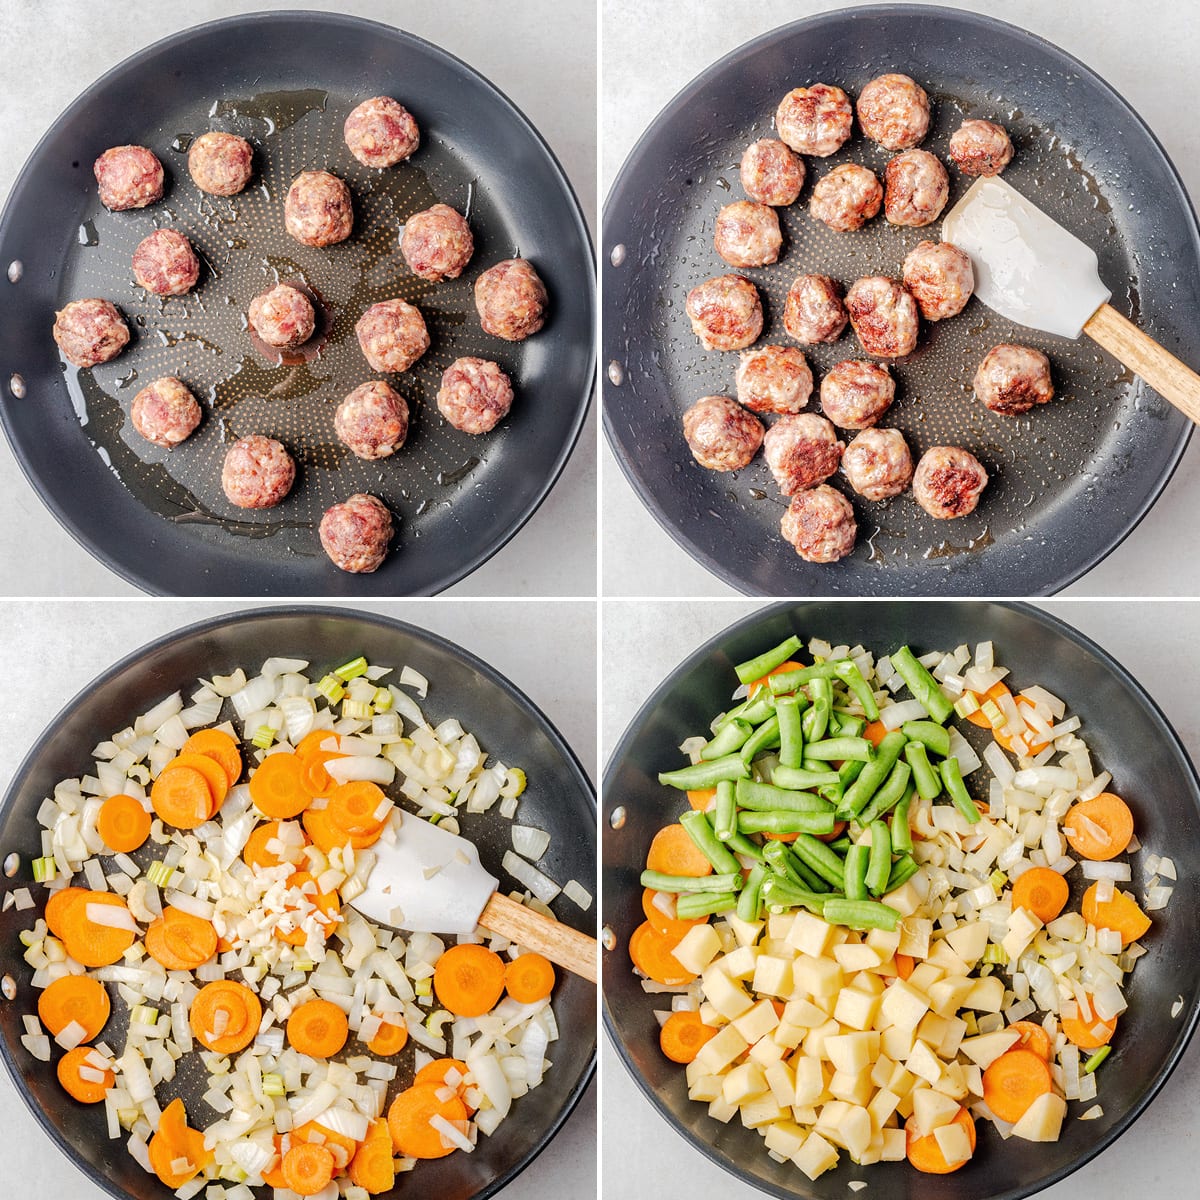 How to make Meatball Stew with veggies.